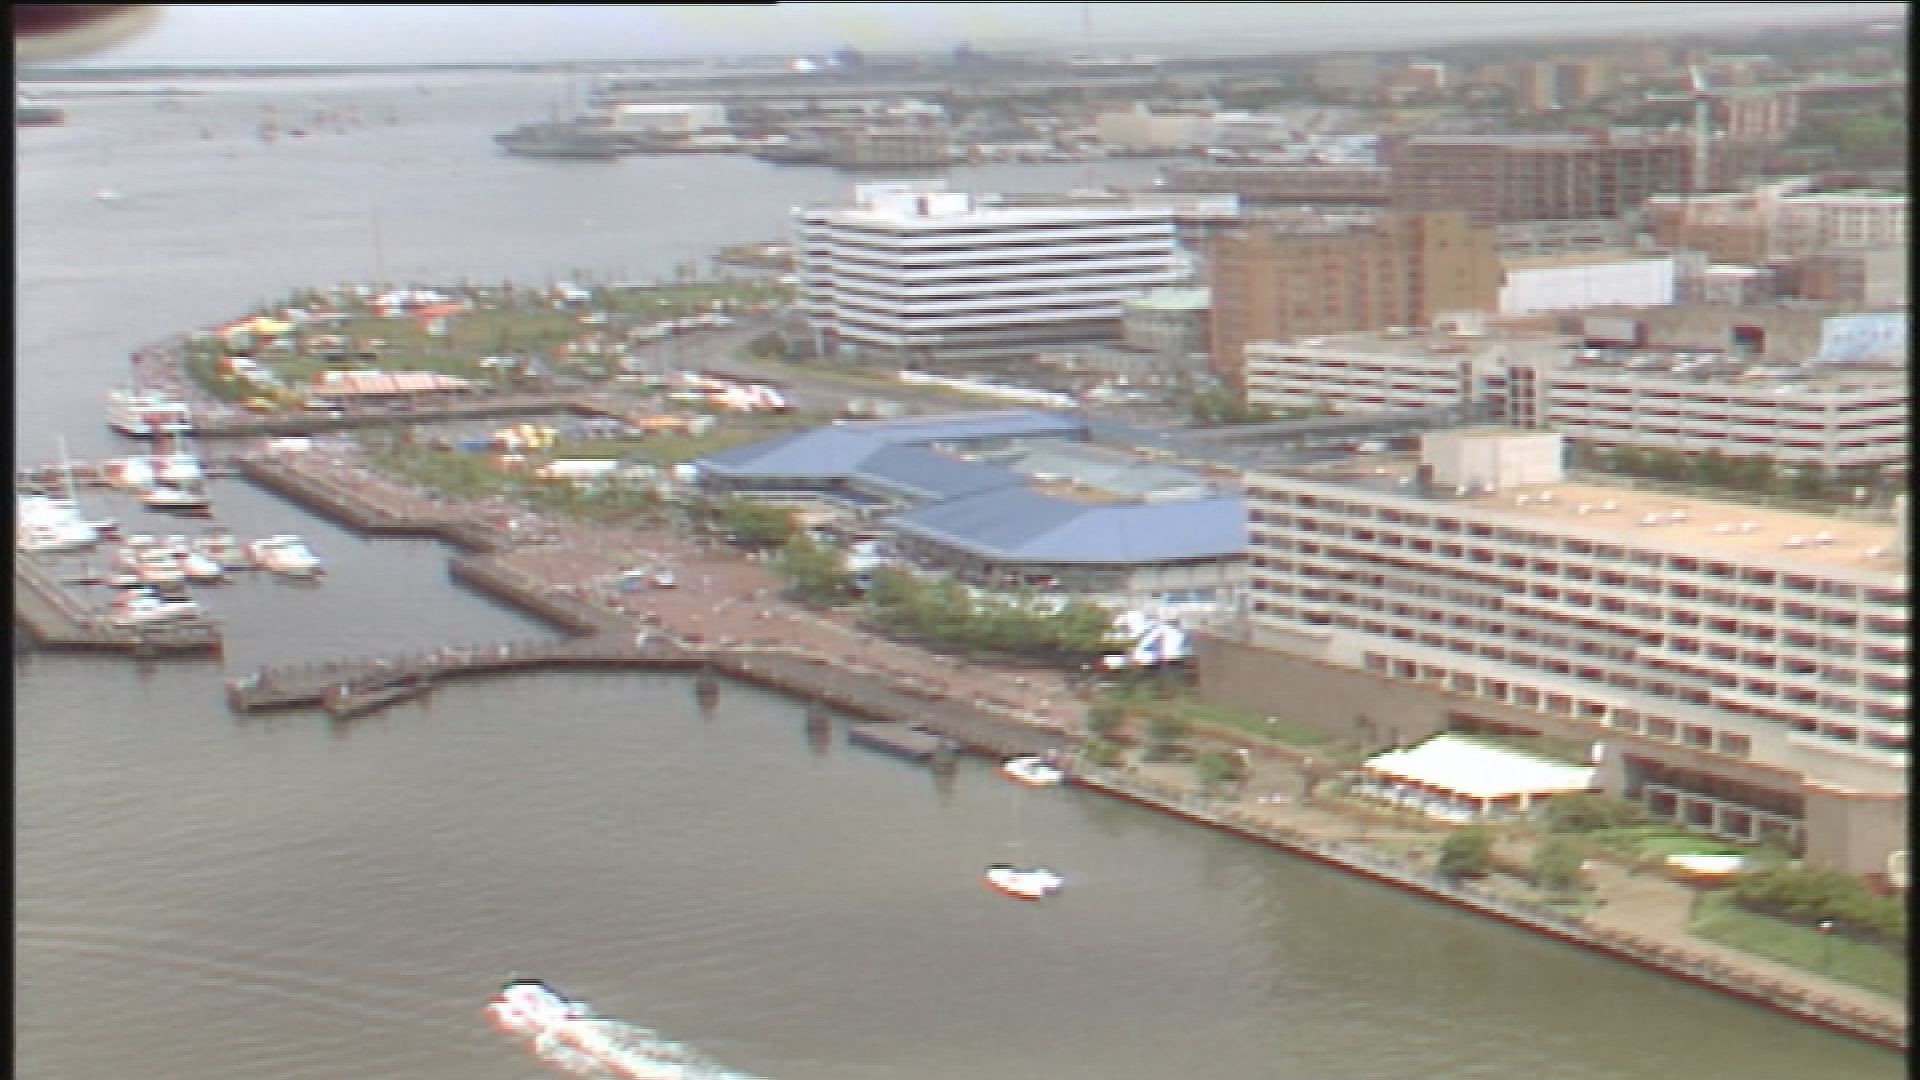 From the 13News Now archives: Much of the downtown Norfolk waterfront has changed over the years, and this story from 1986 highlights many of those changes in a few short years, and what the city expected in the years ahead. Originally aired on June 6, 1986.